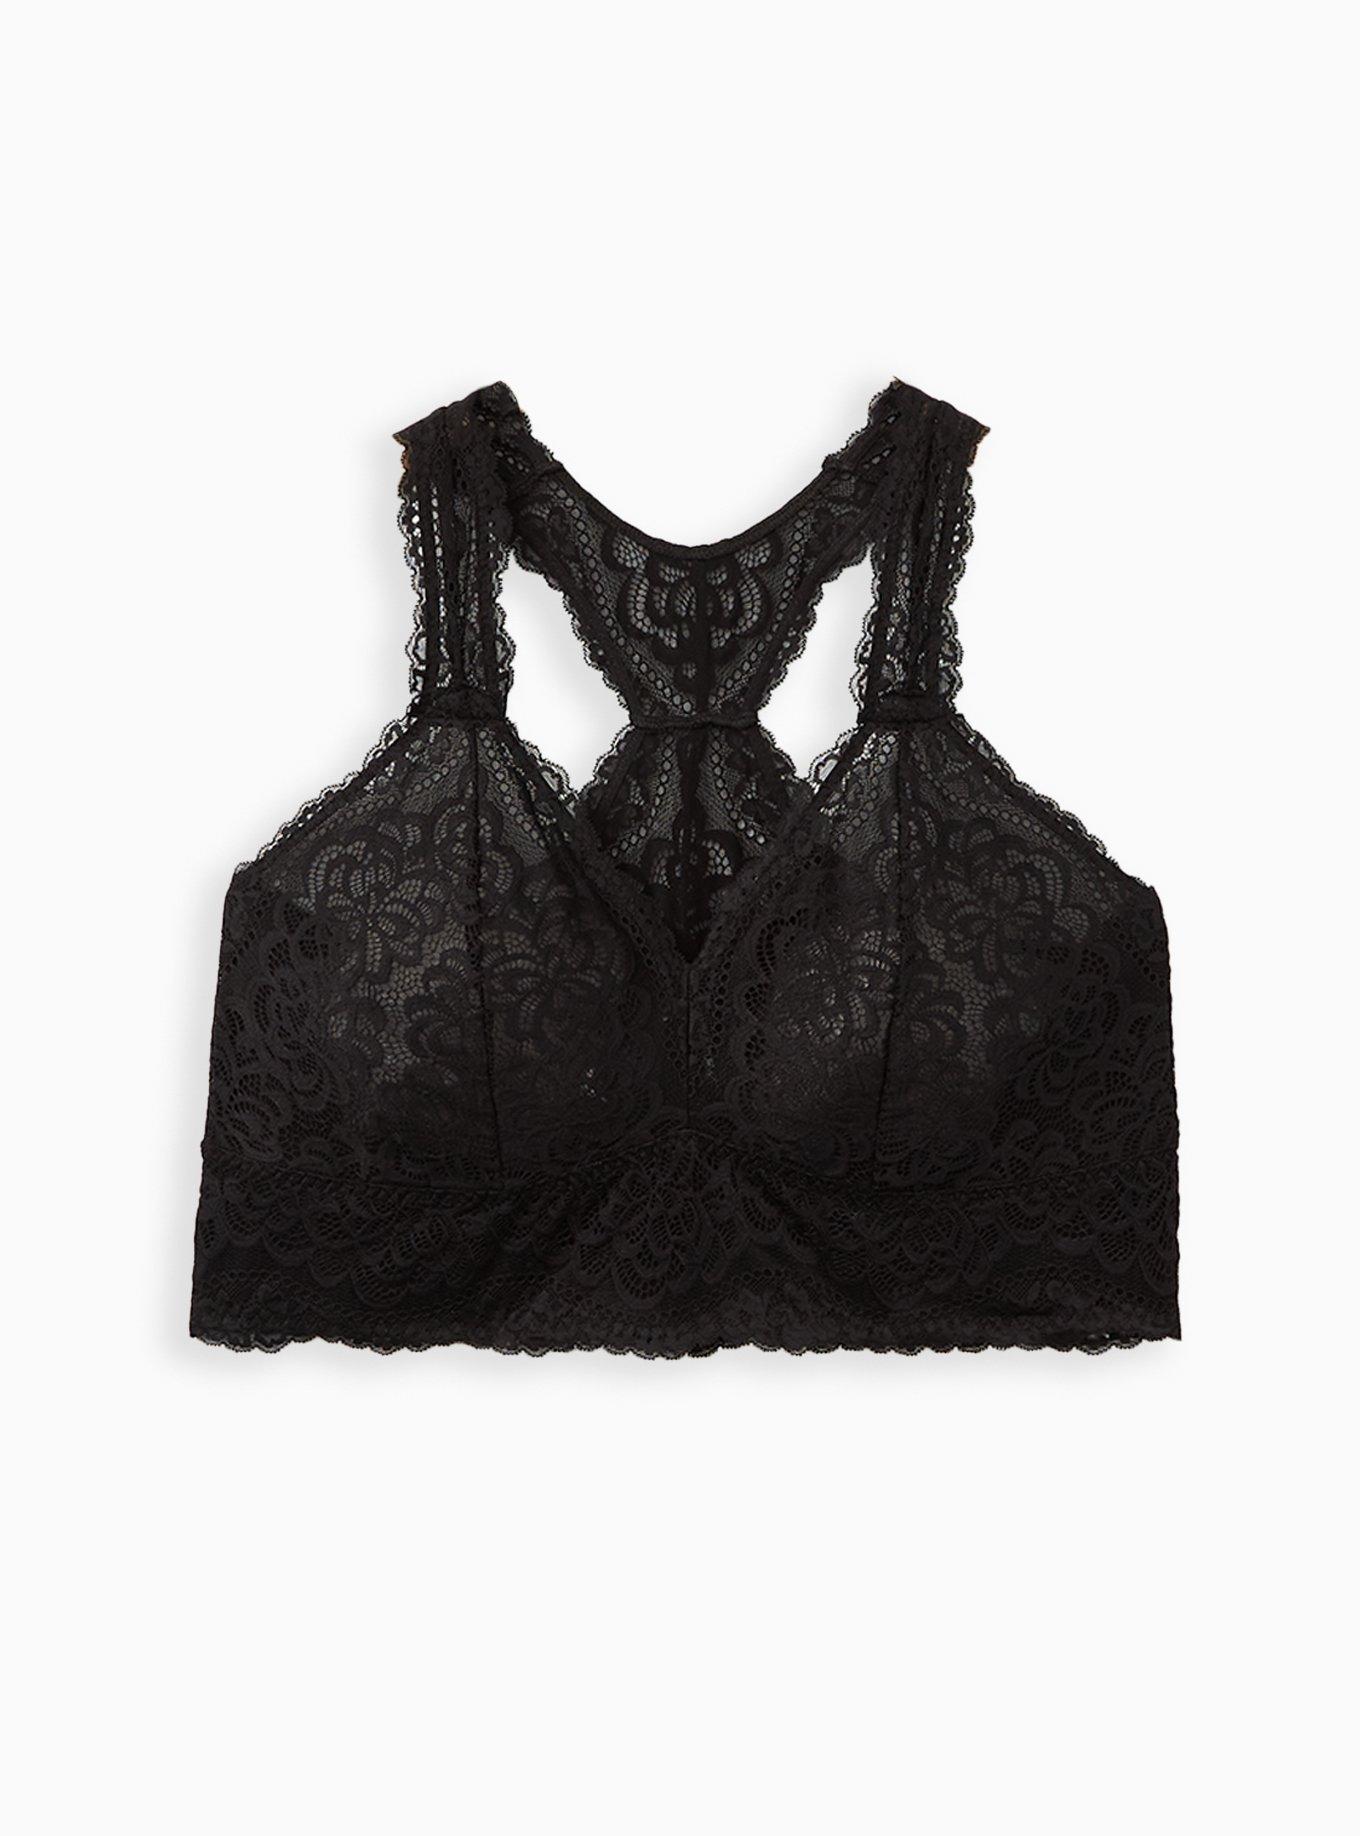 Cacique Women's 4X Plus Black Lace Racerback Bralette Size 26 28 - $23 -  From The Traveling